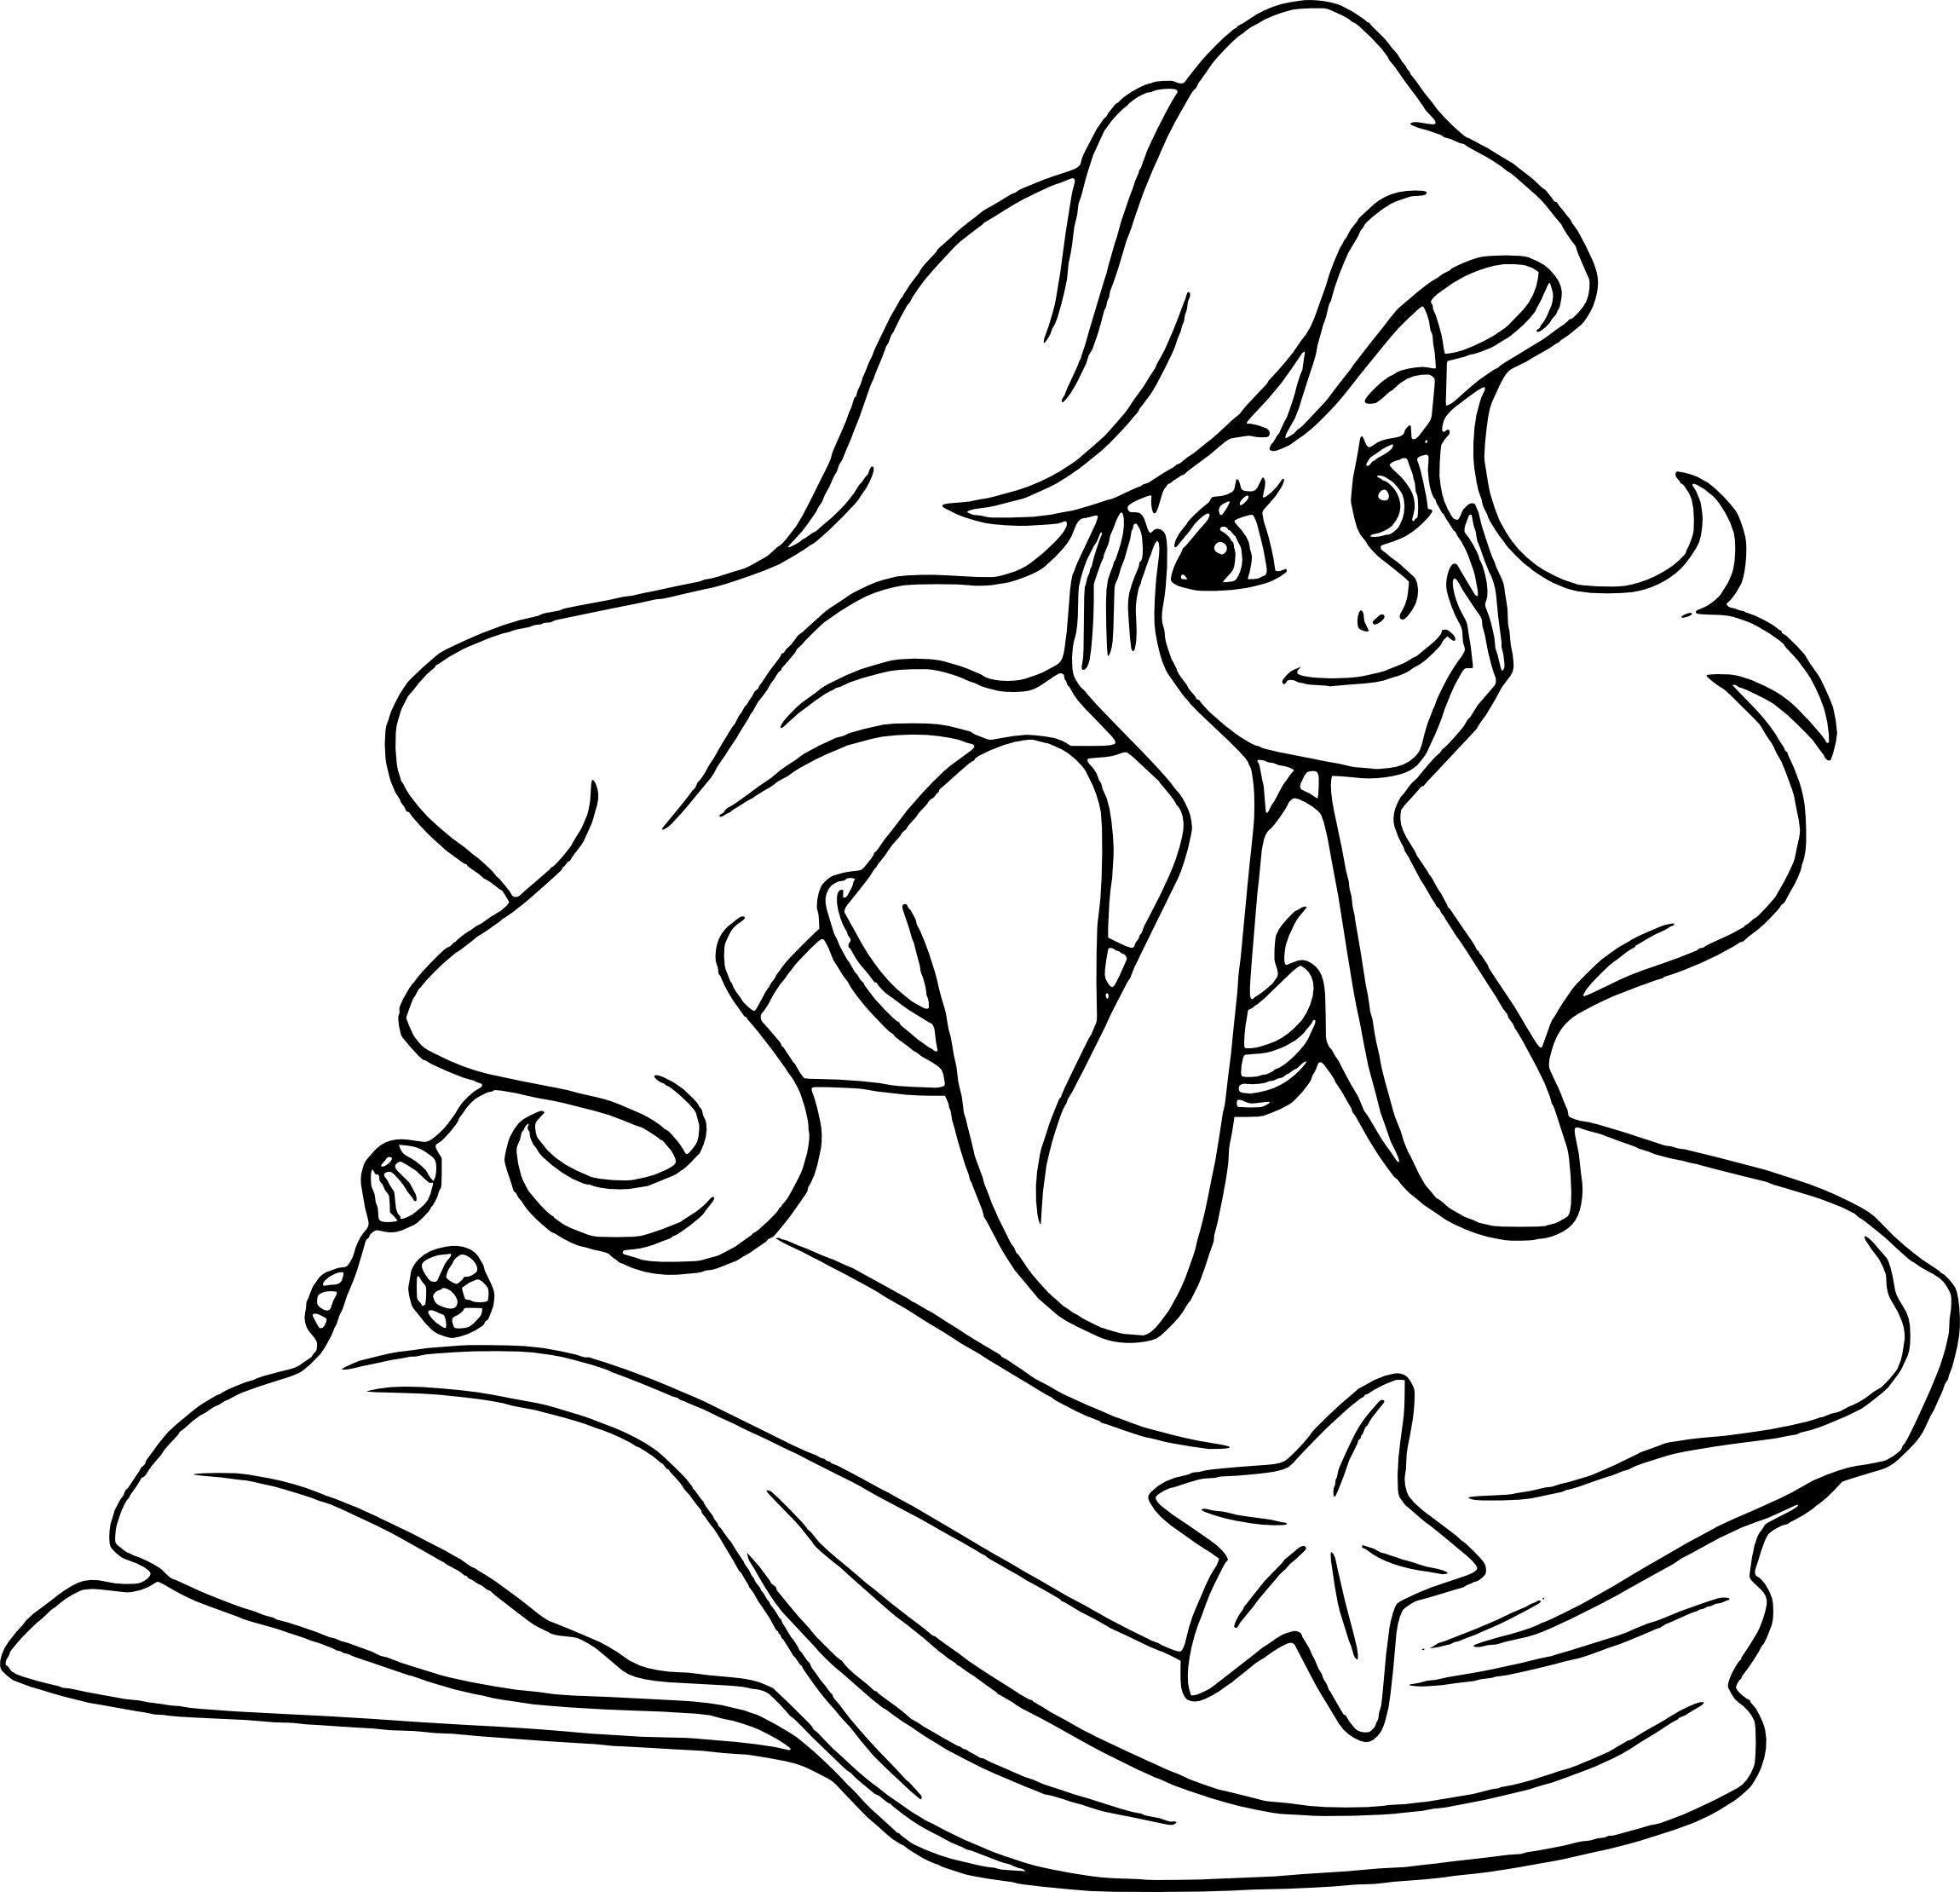 Ariel The Little Mermaid coloring page